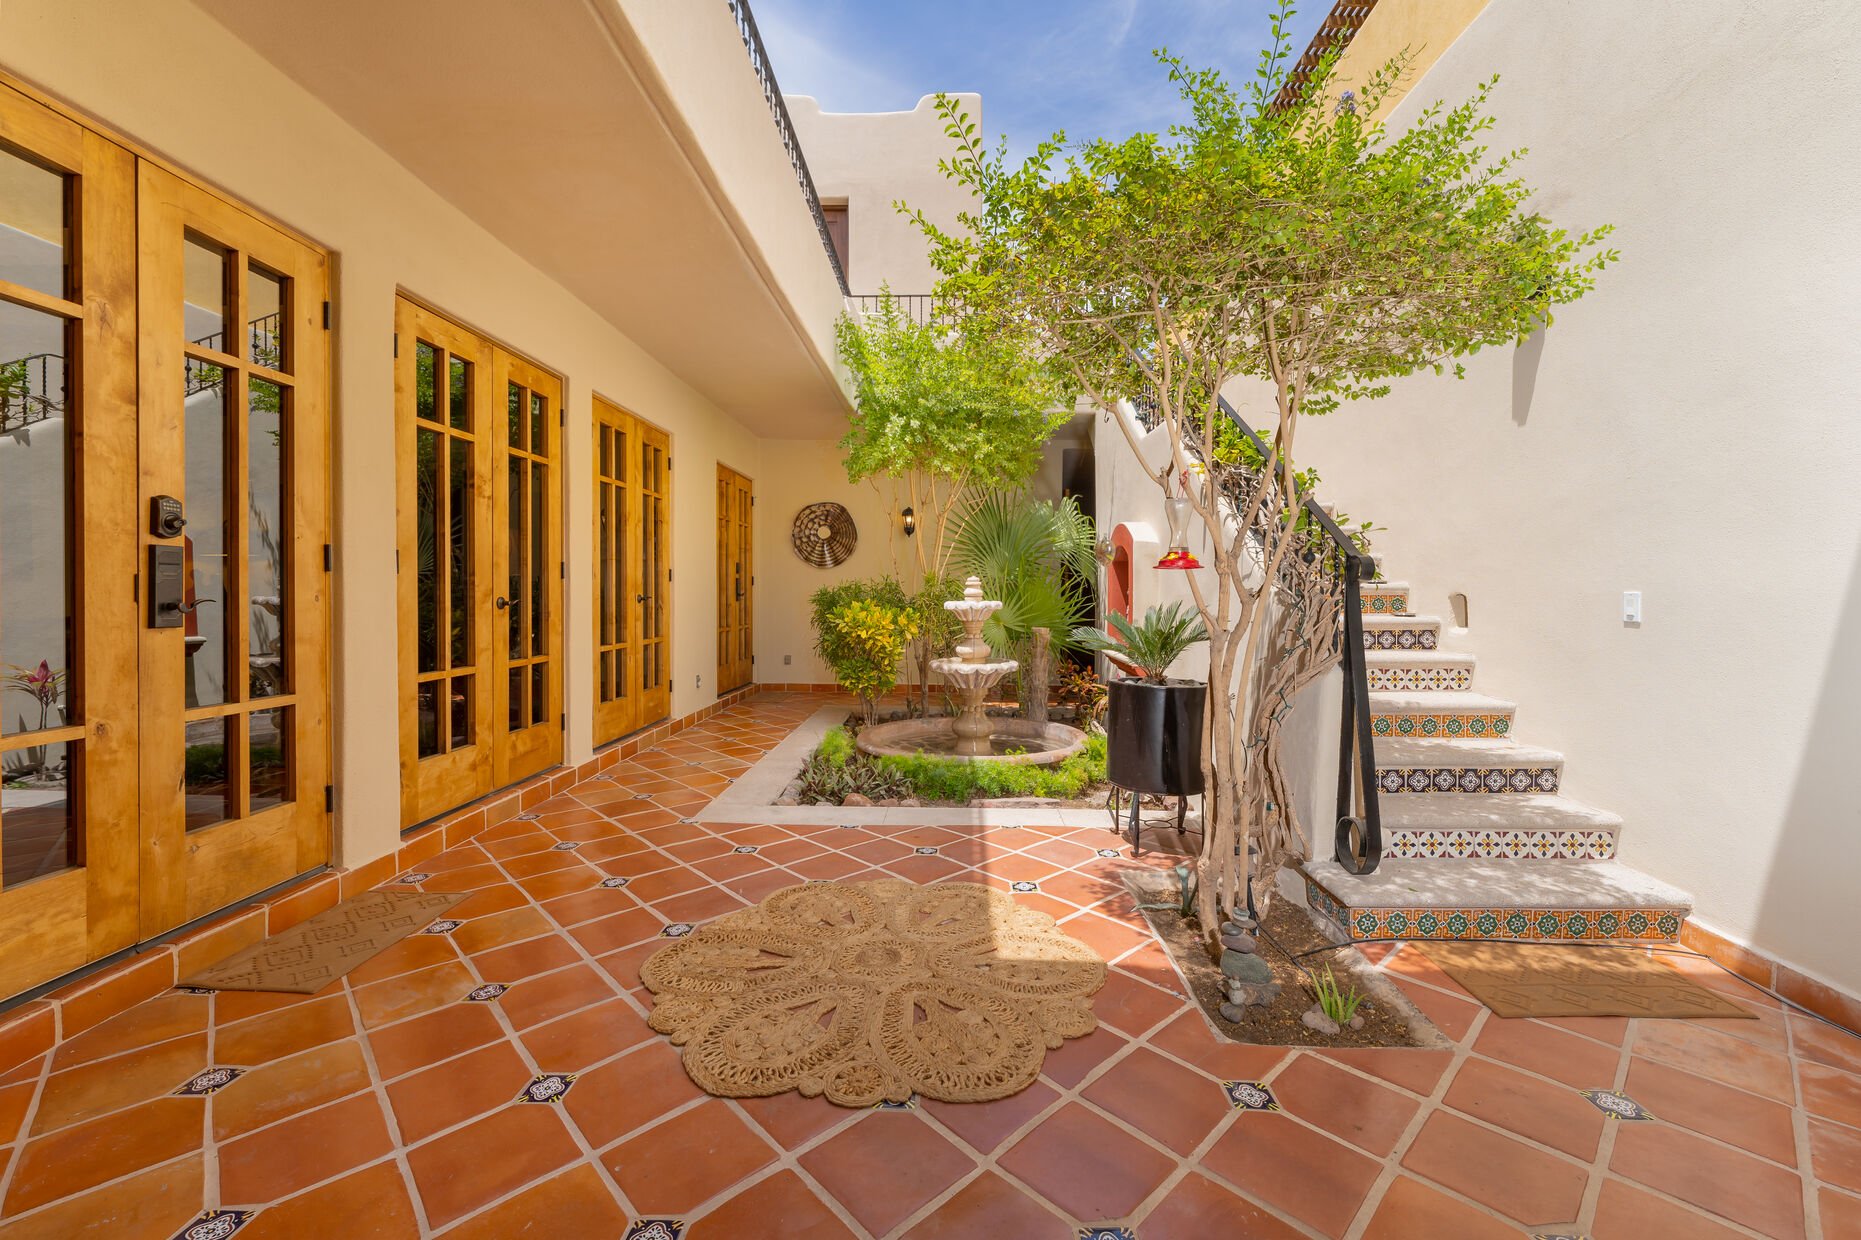 Main floor patio/ Laundry area / Fountain / Stairs to 2nd floor

Casa de los abuelos, 3Beds, Private pool, 2 bikes available for guest. Beautiful Mountain View.